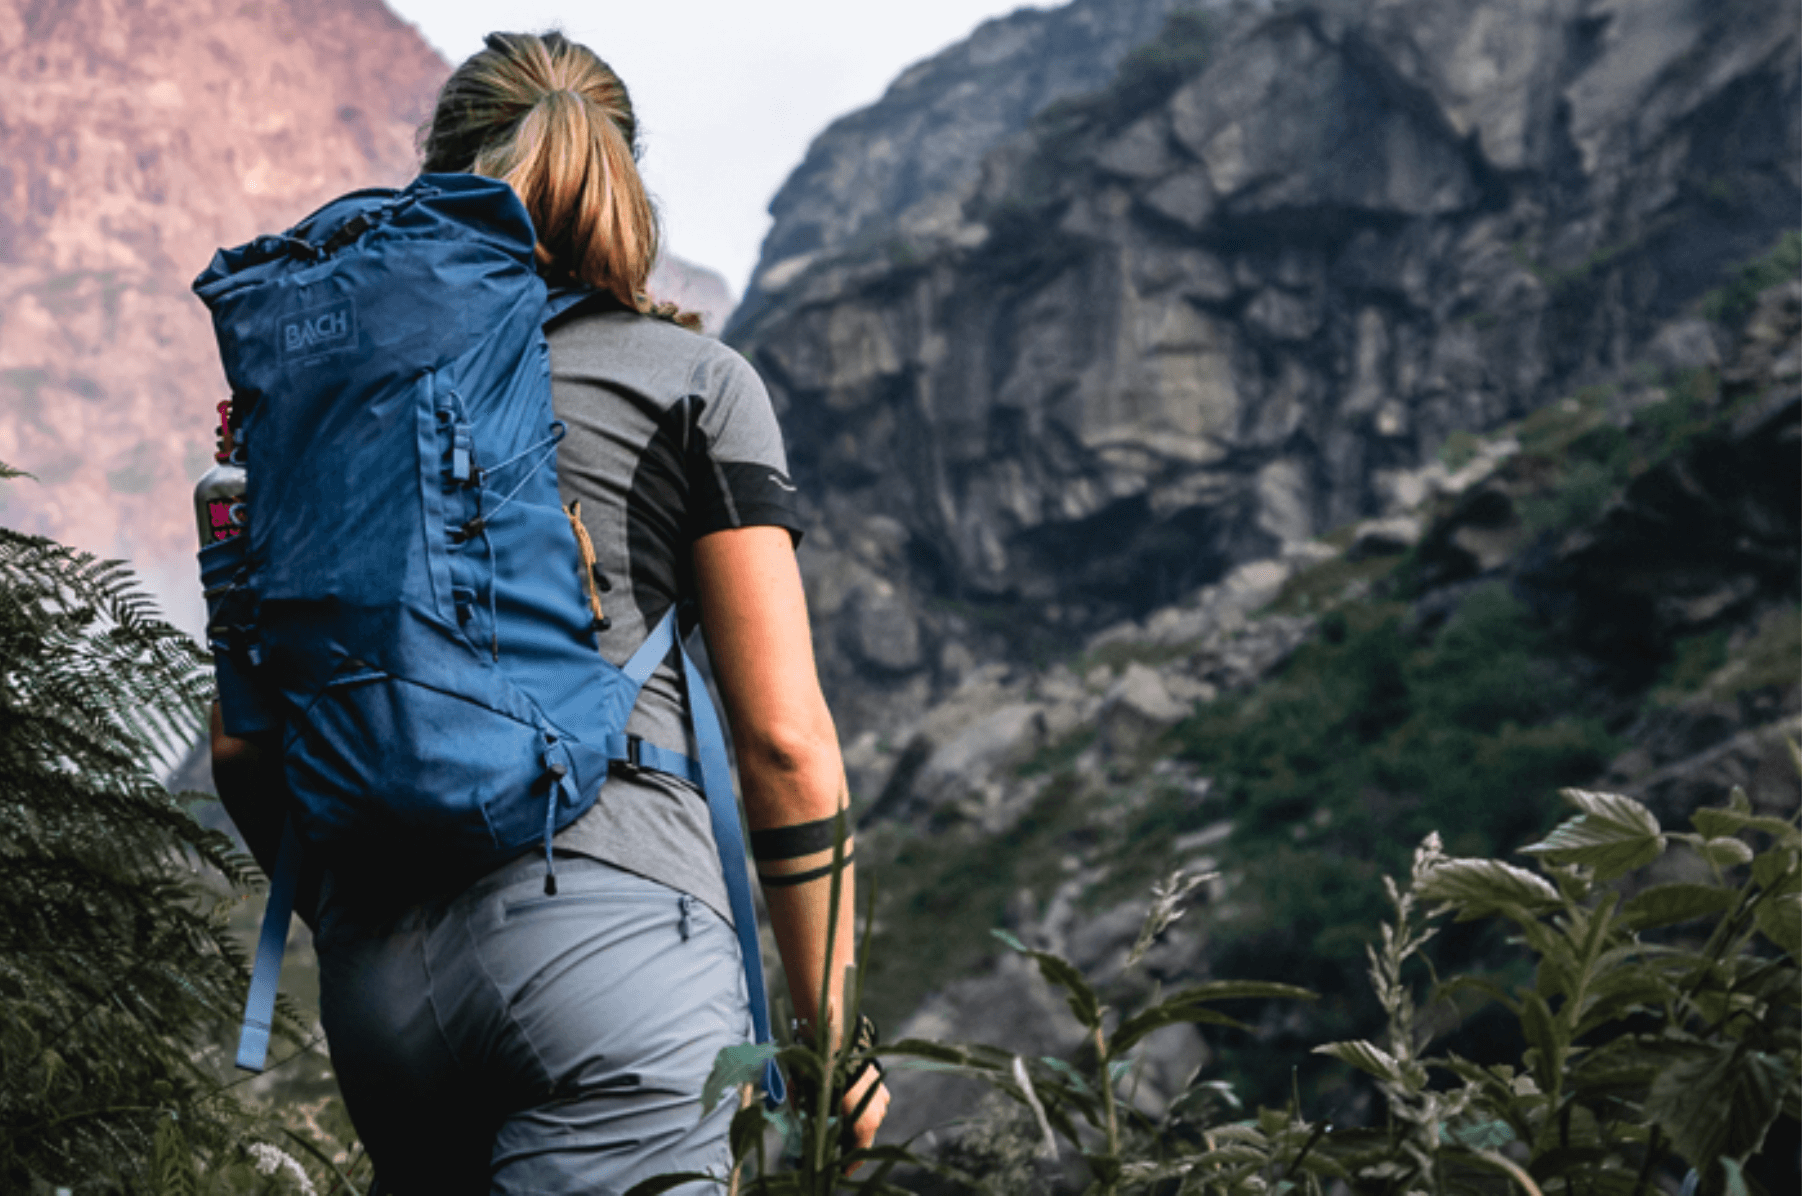 win an adventure backpack